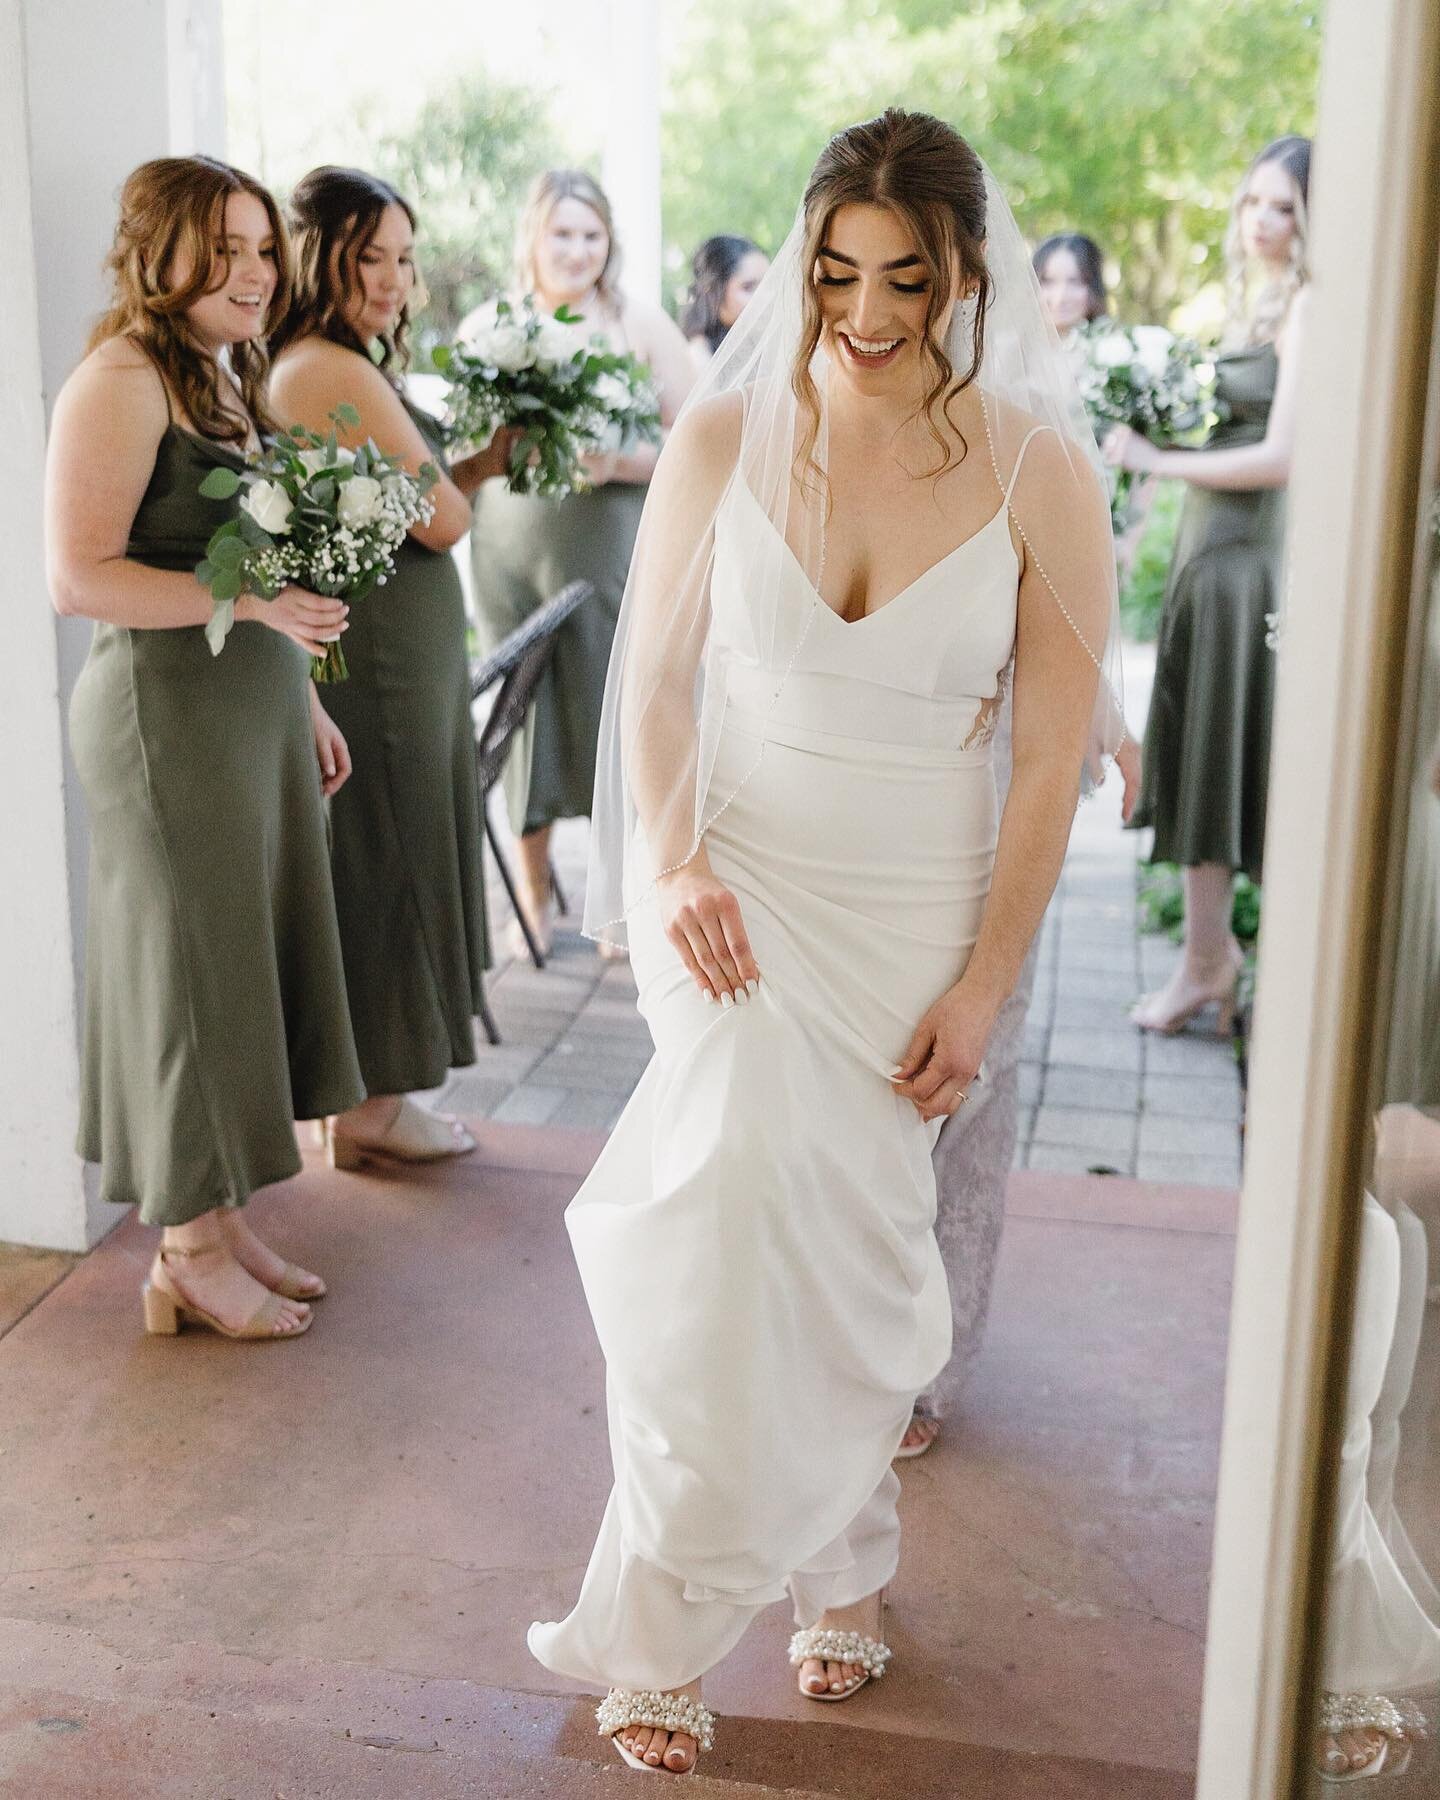 The perfect Texas summer wedding, swipe to slide #4 for the ladies who stole the show 🥹🤭

Planning &amp; Florals: @juliawintersevents 
Venue: @texasdiscoverygardens 
Photography: @jamieparkphoto 
Hair &amp; Makeup: @sheisartbeauty 
Gown: @aandbe_da